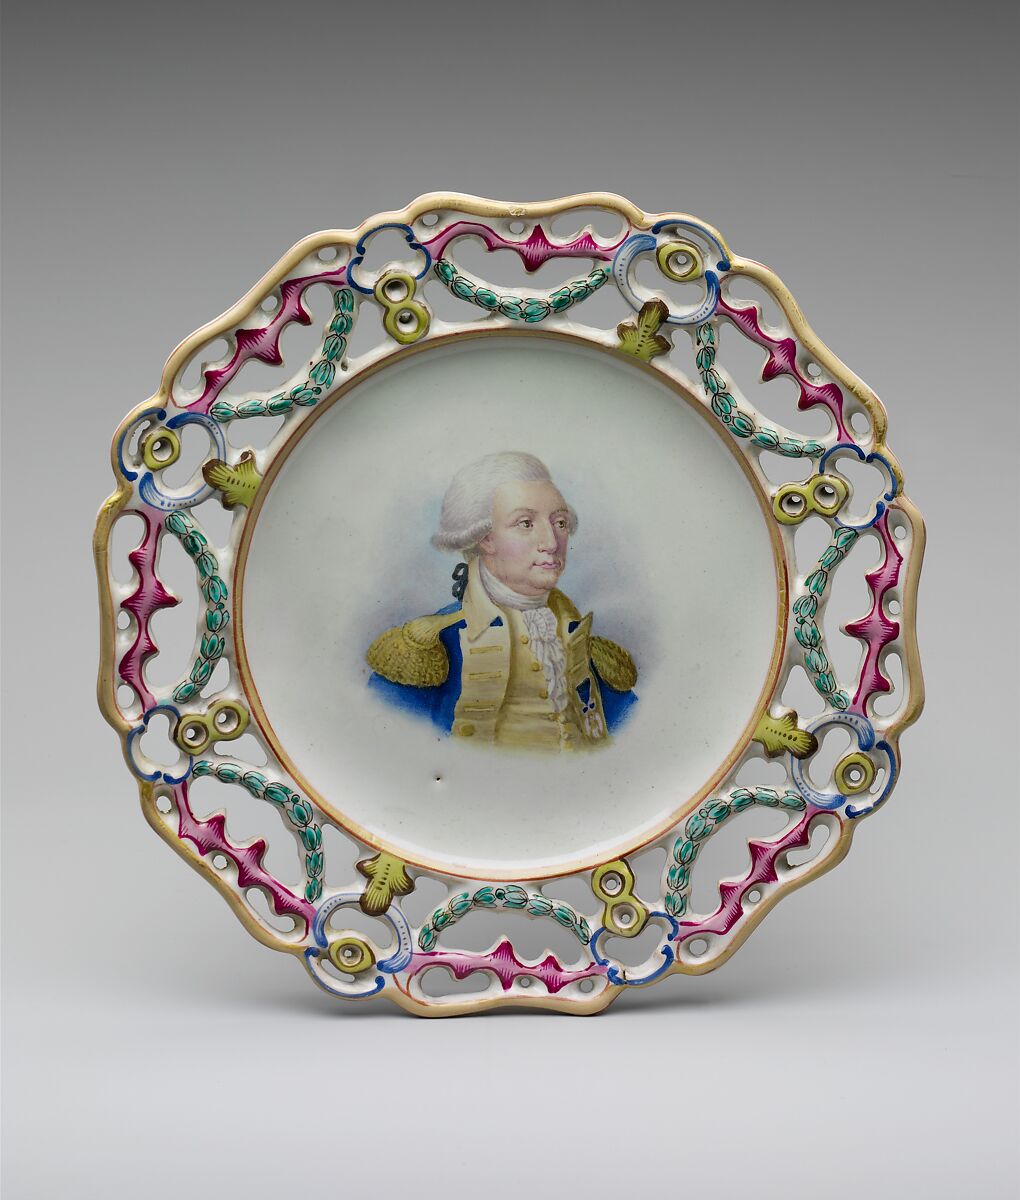 Plate, Pierrette Caudelot Perrin (died 1793), Faience, French 